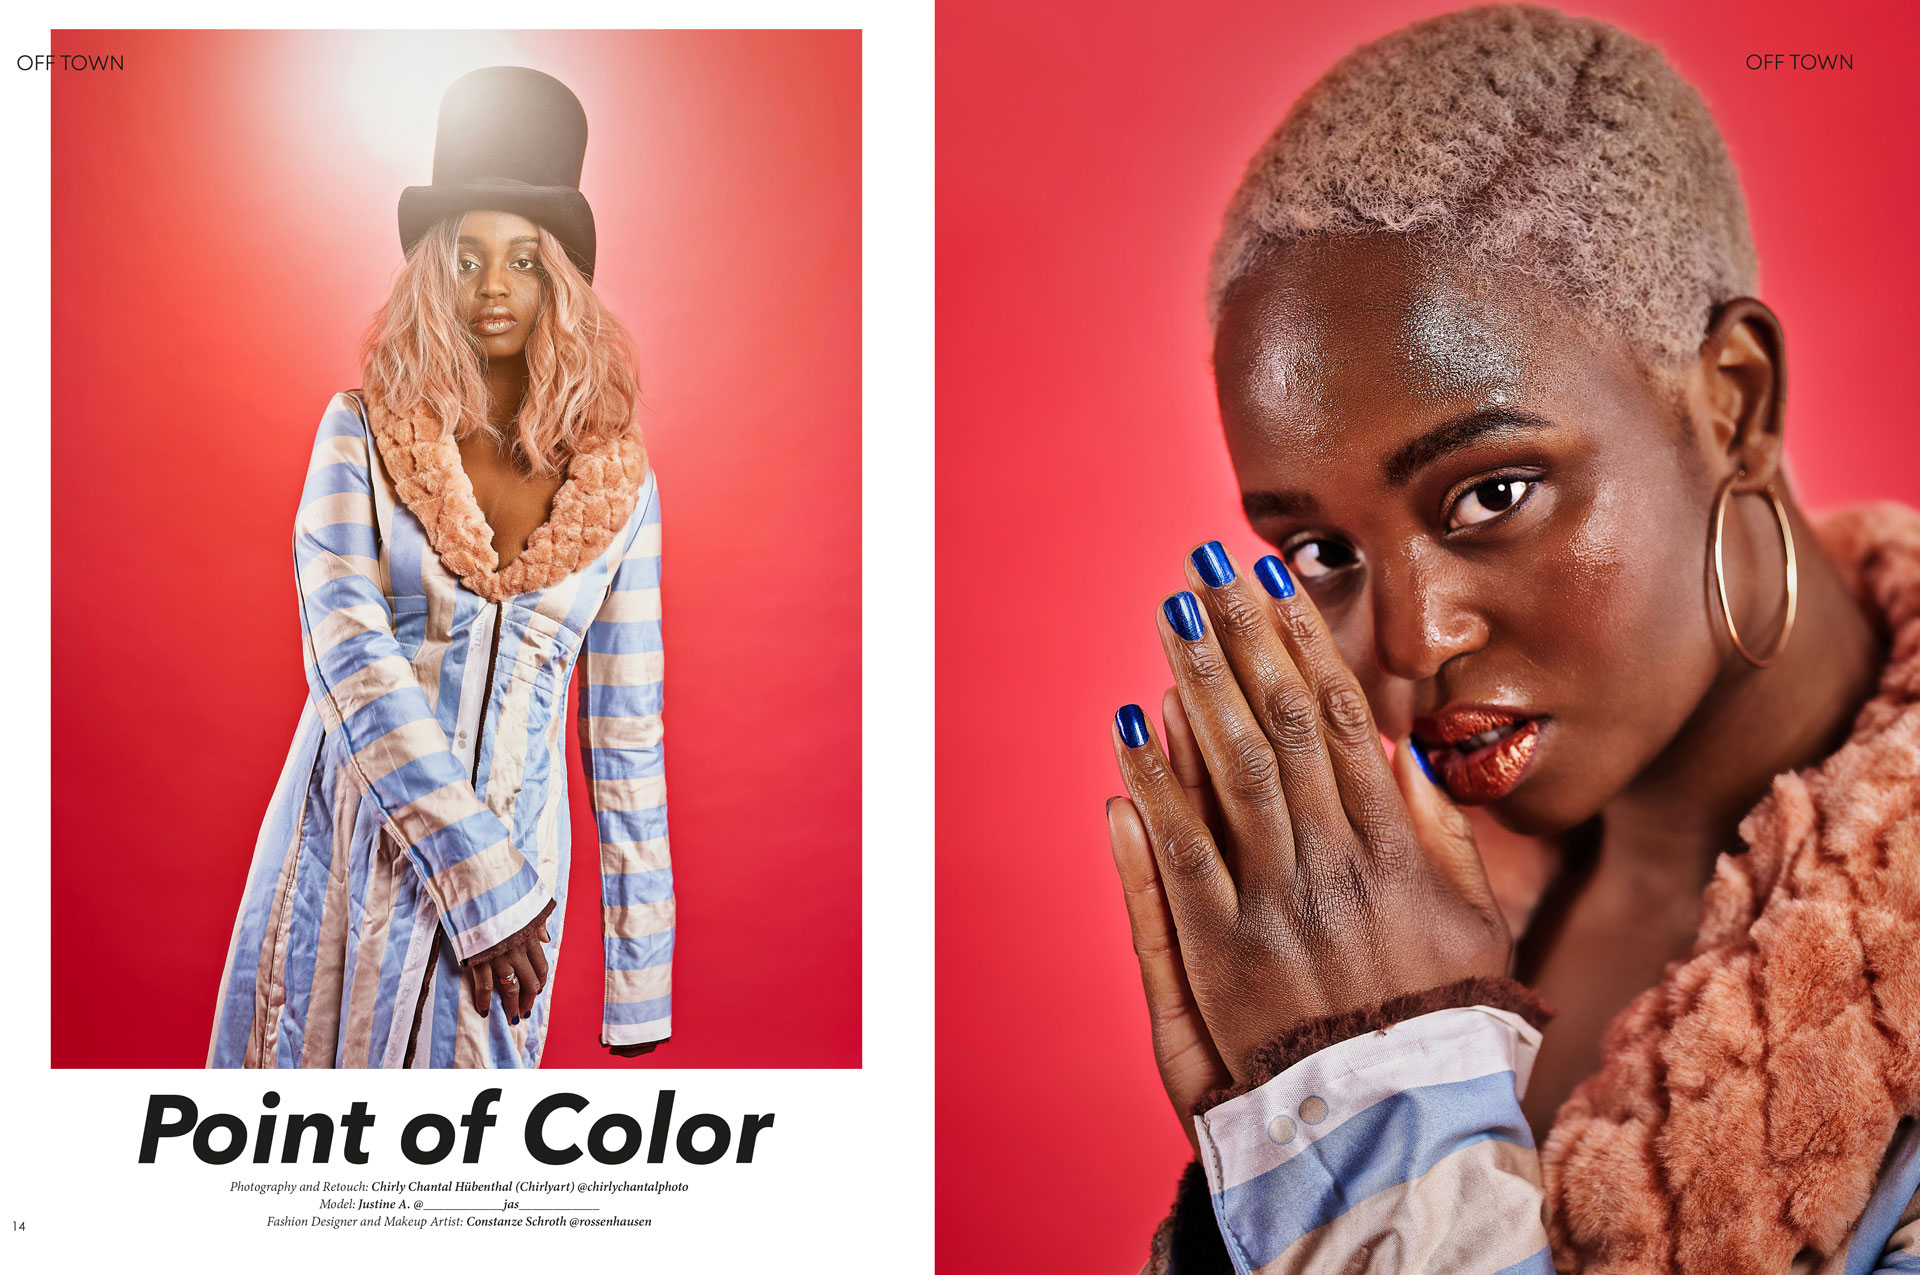 Off Town Magazine Poin of Color